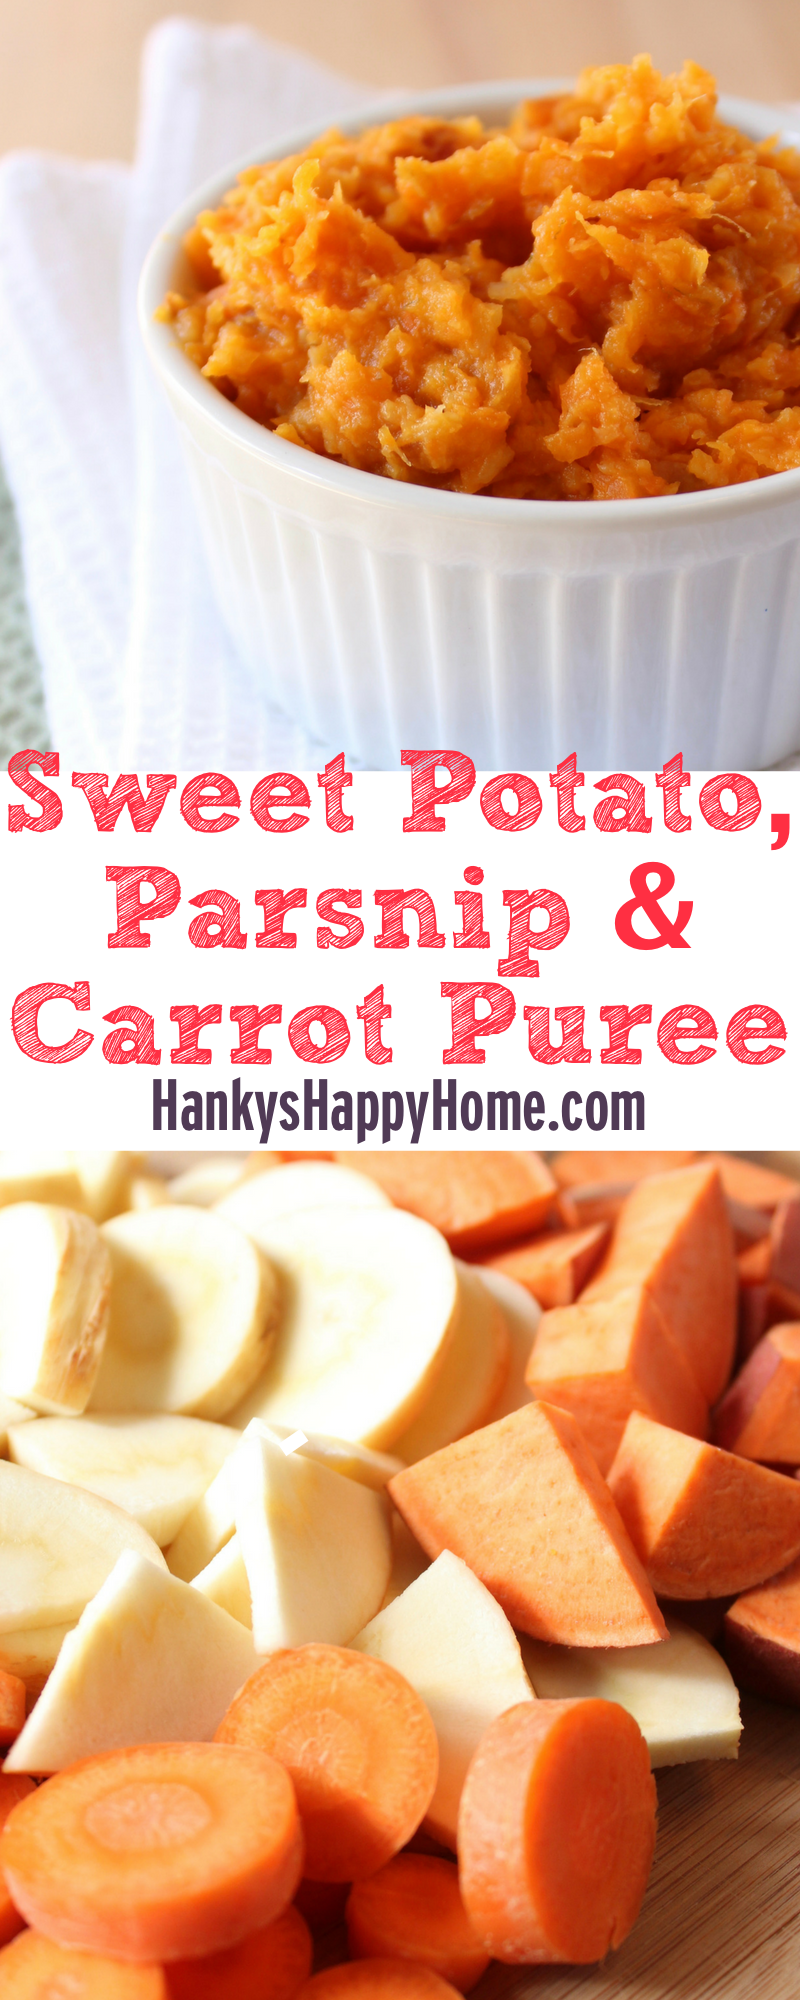 This Sweet Potato, Parsnip & Carrot Puree combines 3 nutrient-dense root vegetables into an earthy yet sweet puree.